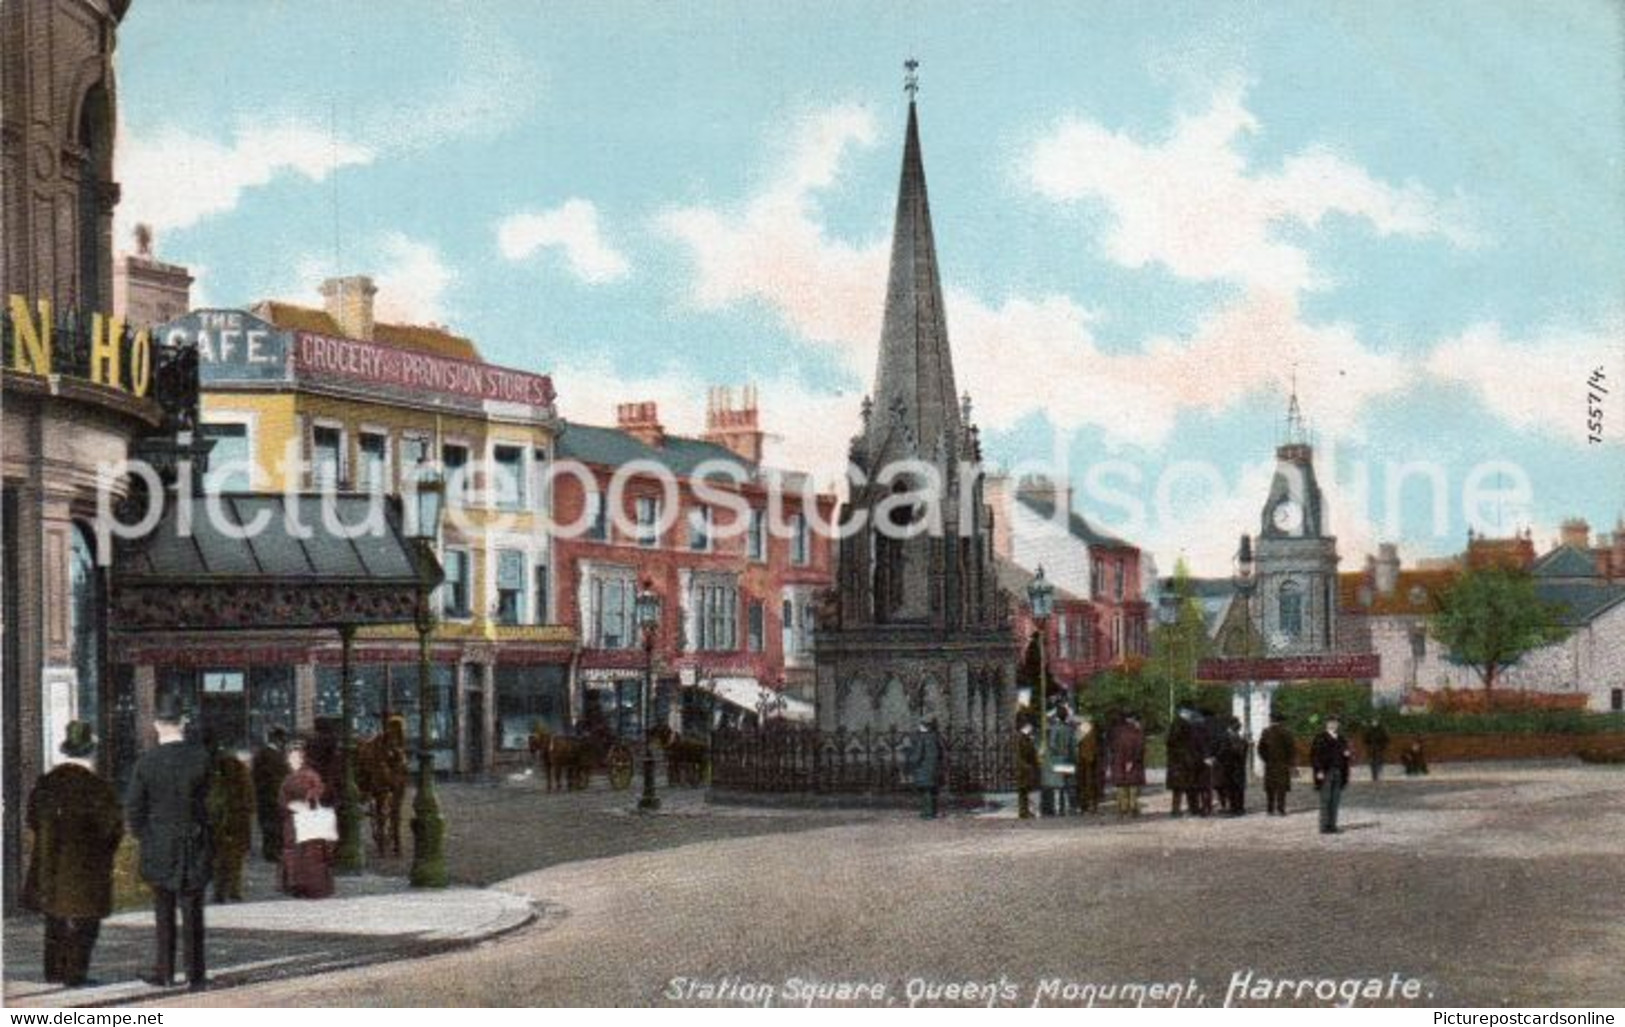 HARROGATE STATION SQUARE AND QUEENS MONUMENT OLD COLOUR POSTCARD YORKSHIRE - Harrogate